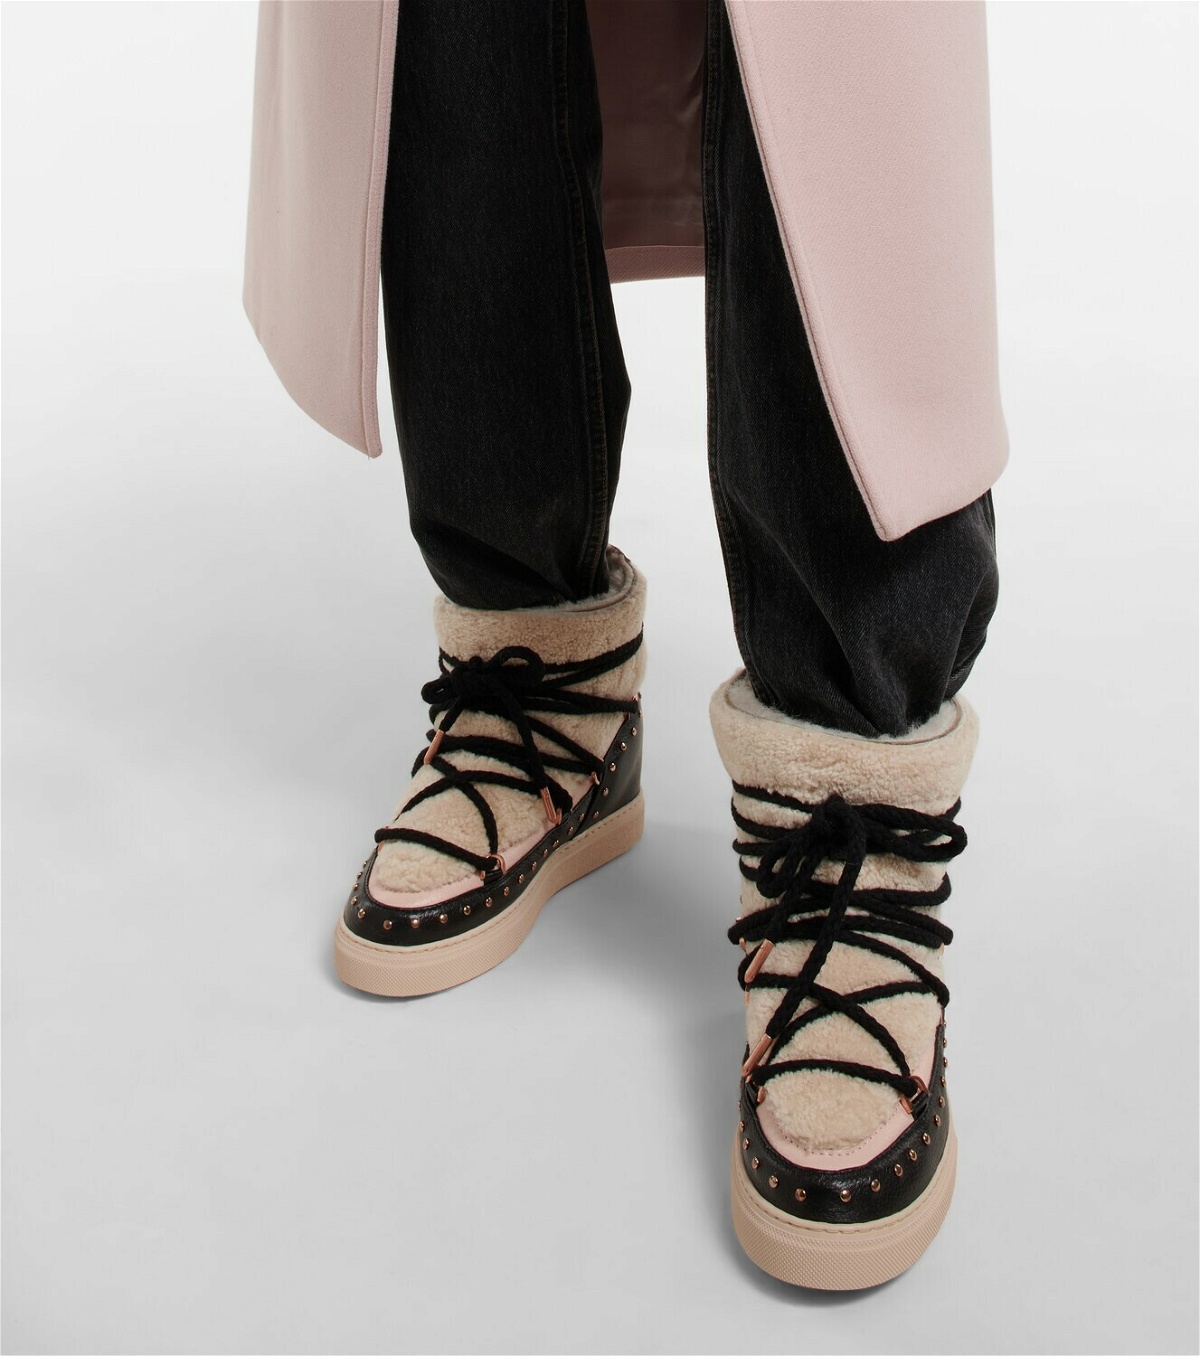 Inuikii Shearling and leather boots